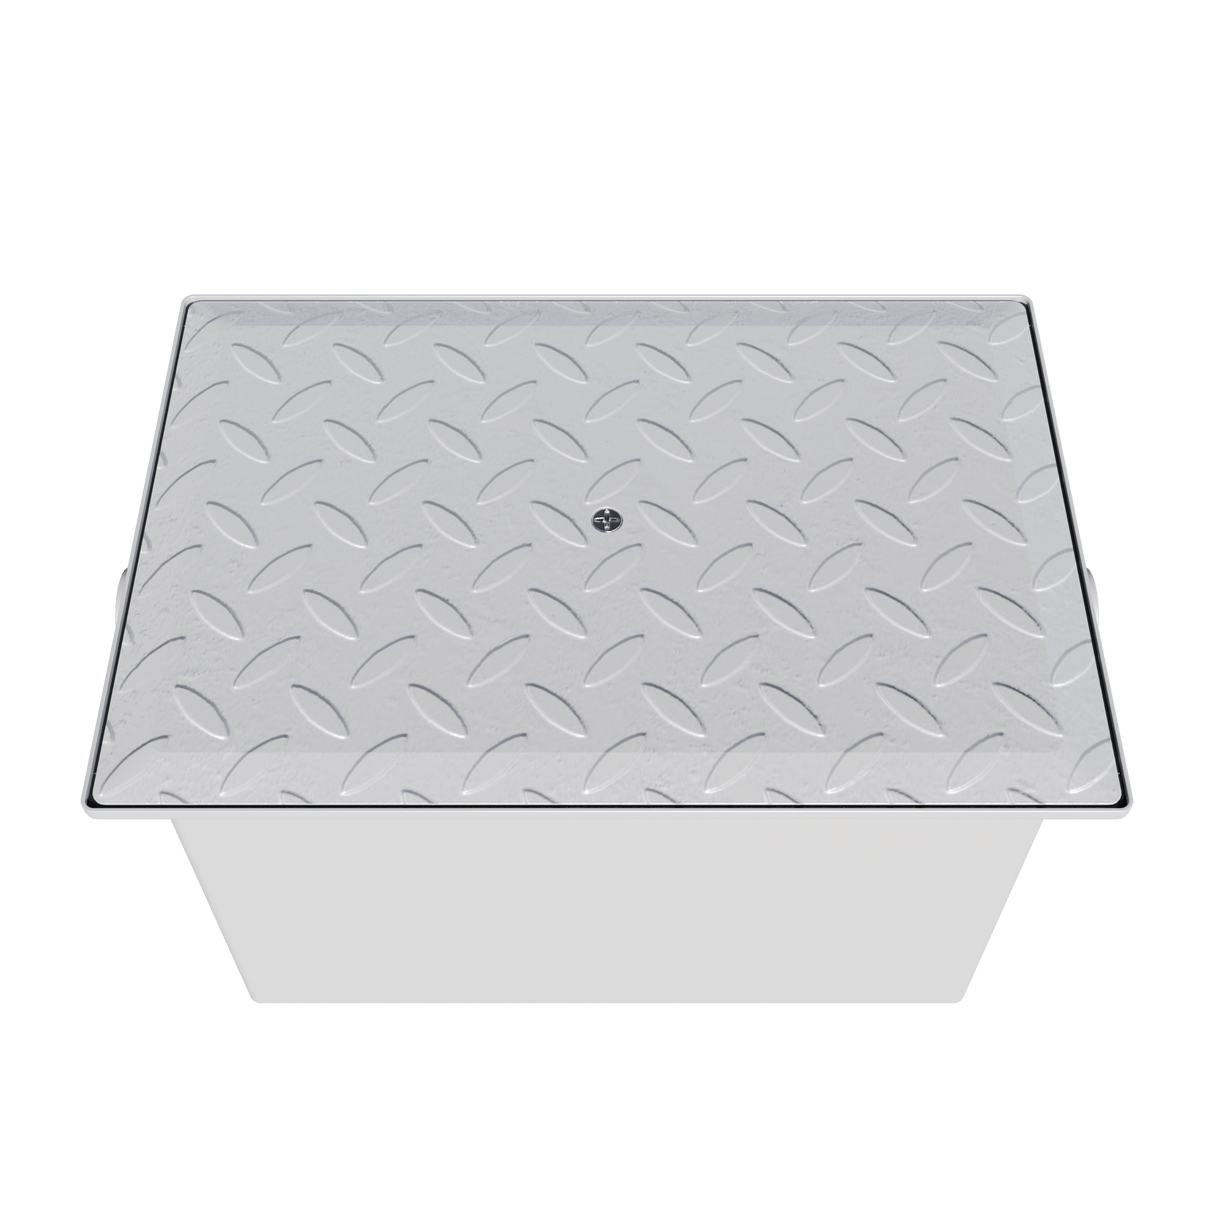 Commercial Grease Trap Epoxy Coated Steel 13 Litre Capacity - 4KGB Grease Traps / Interceptors - Mild Steel Empire   